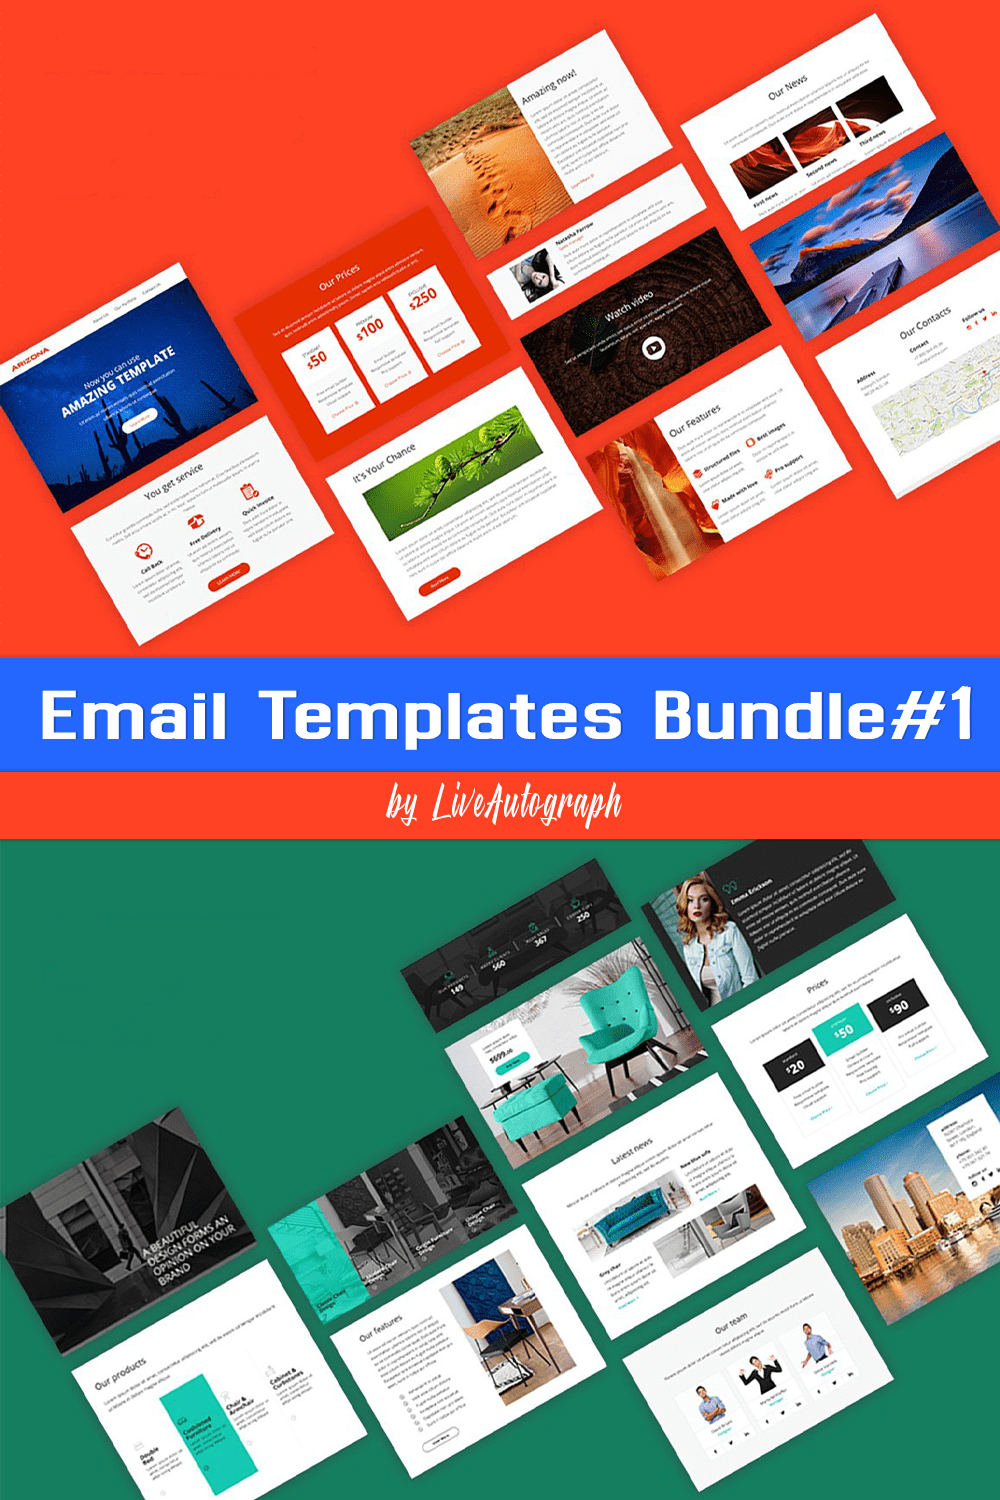 Set of images of irresistible email design templates.